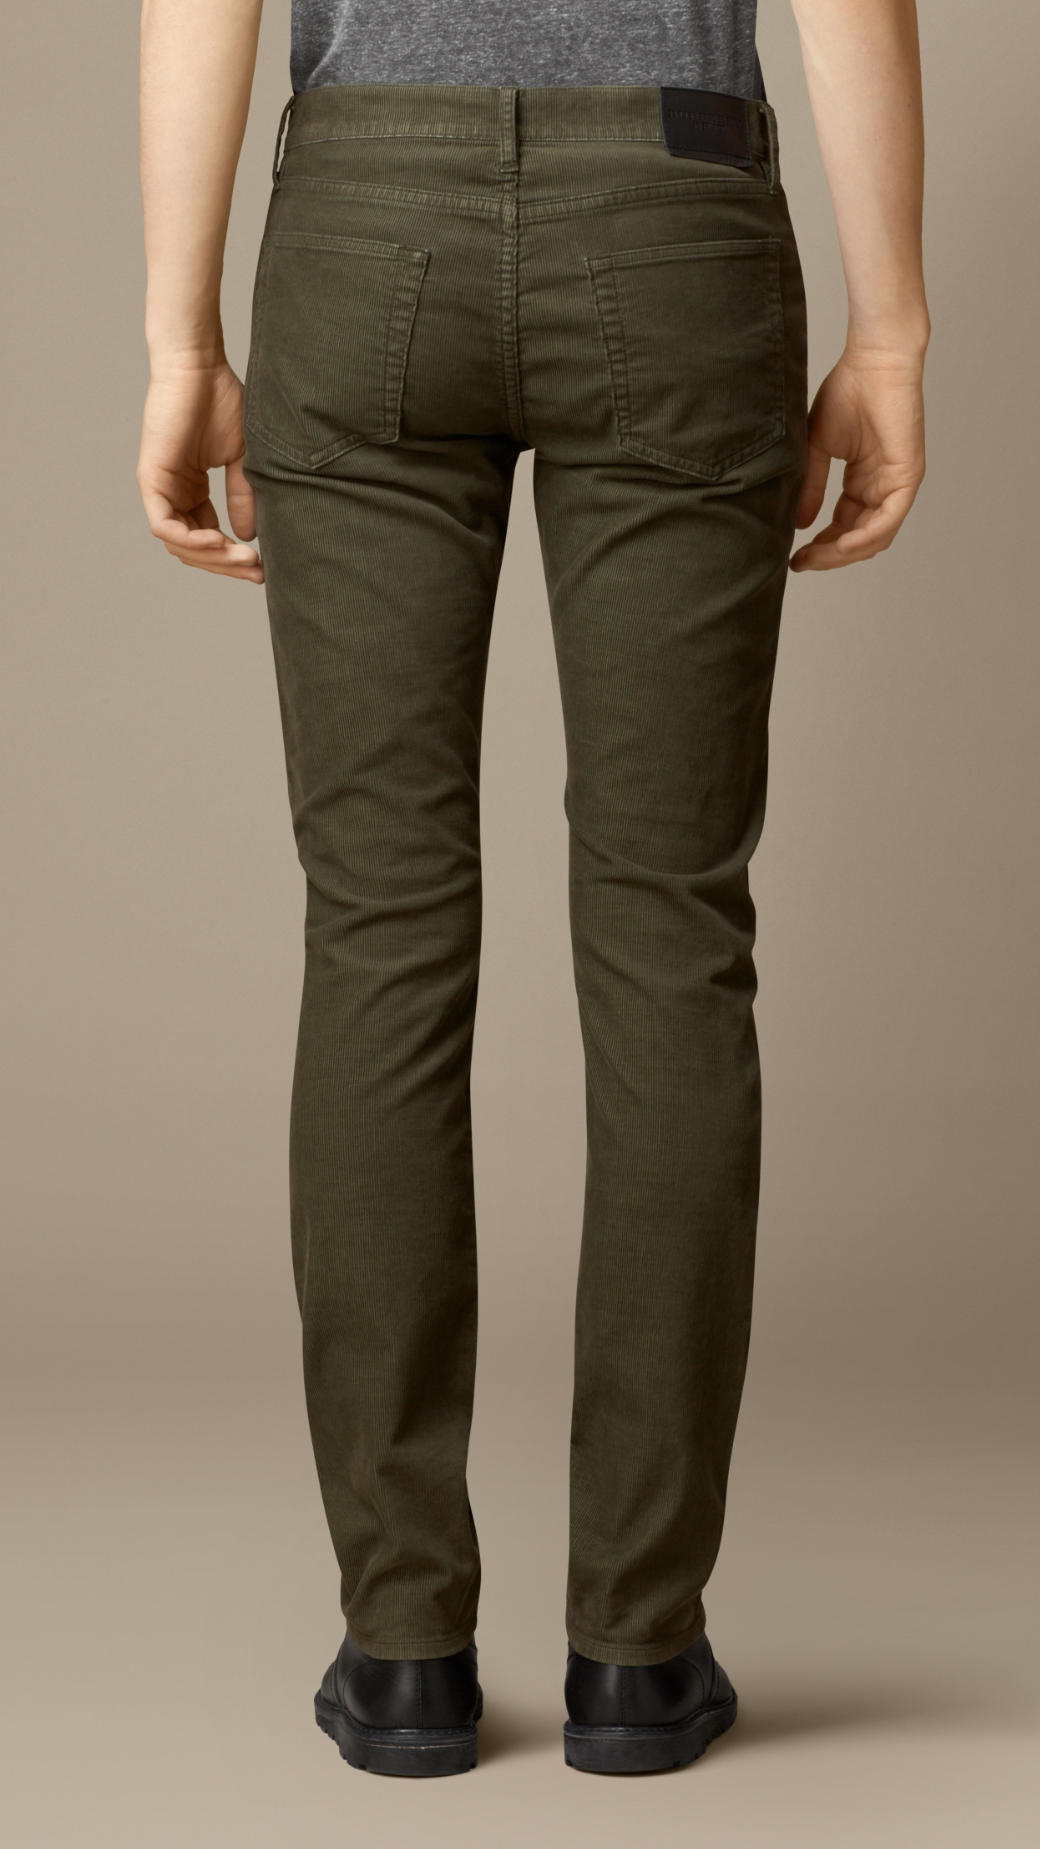 Burberry Slim Fit Corduroy Trousers in Dark Olive (Green) for Men - Lyst